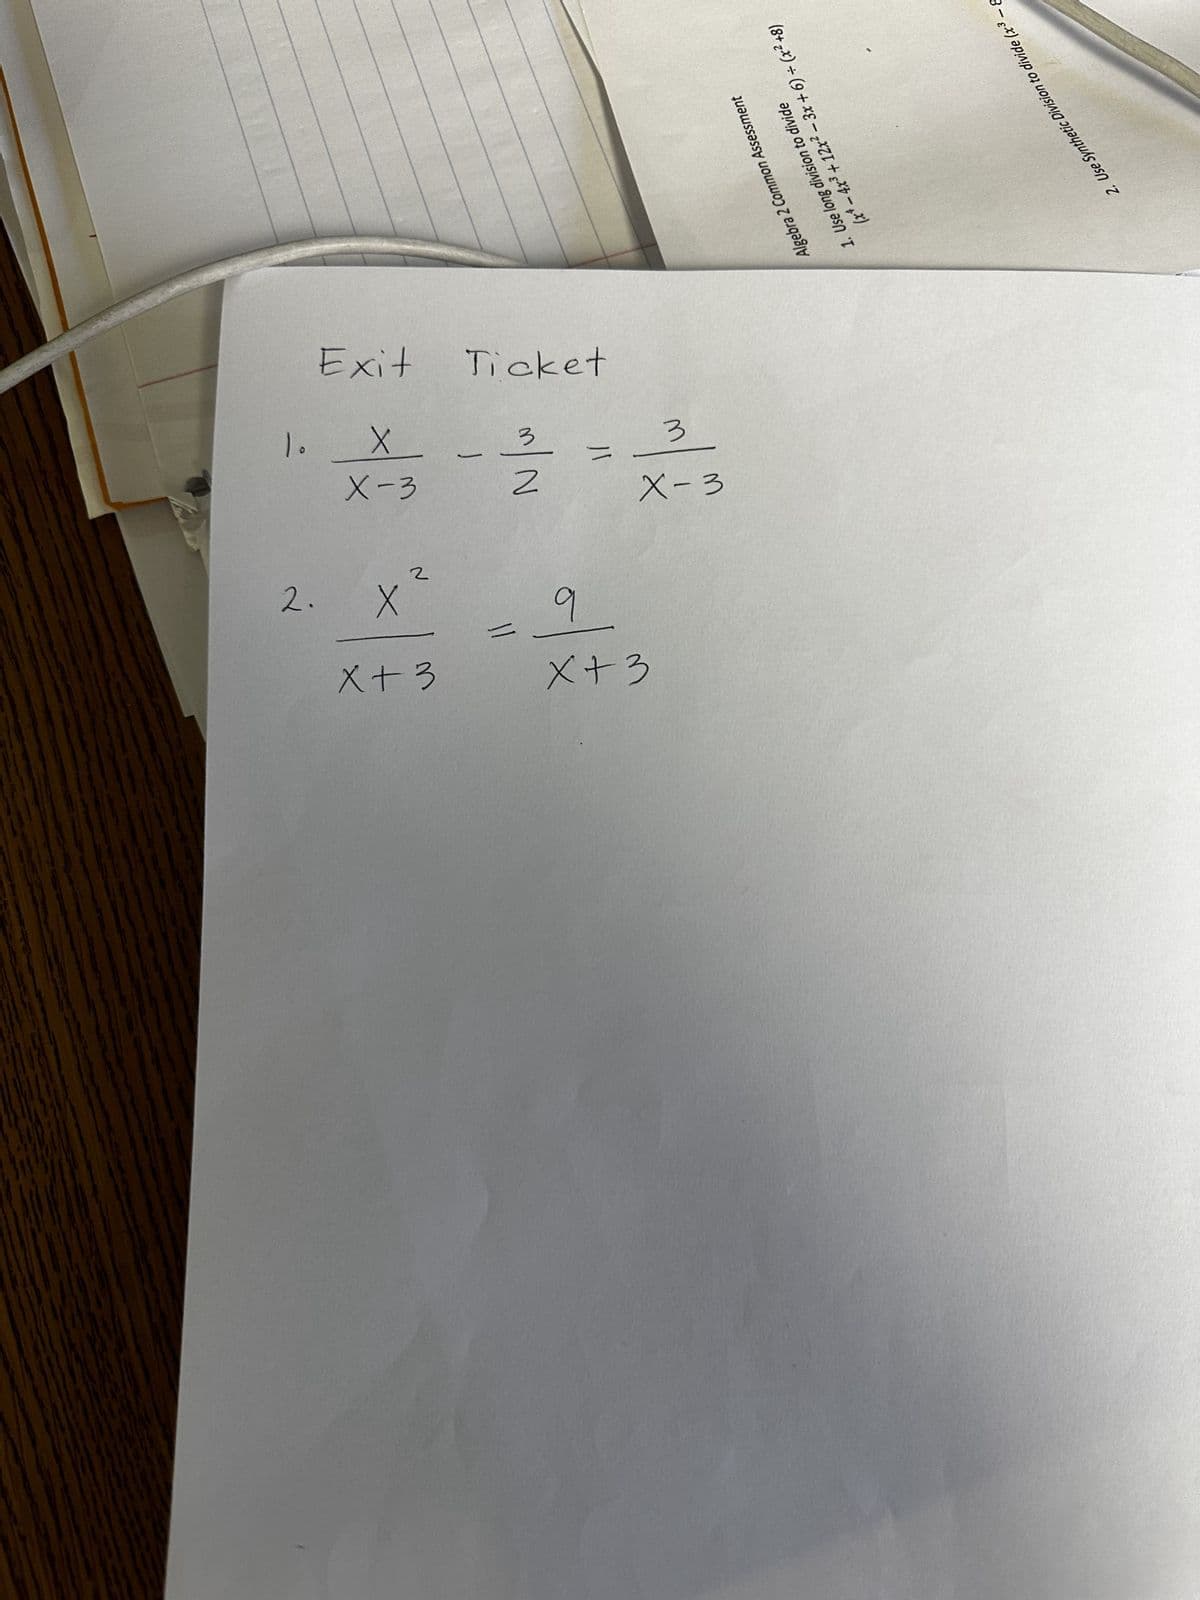 Exit Ticket
1. X_
х
X-3
3
2
=
2. X
2
x+3
b
=
x+3
3
X-3
Algebra 2 Common Assessment
1. Use long division to divide
(x4 − 4x³ + 12x² − 3x + 6) ÷ (x² +8)
2. Use Synthetic Division to divide (x3